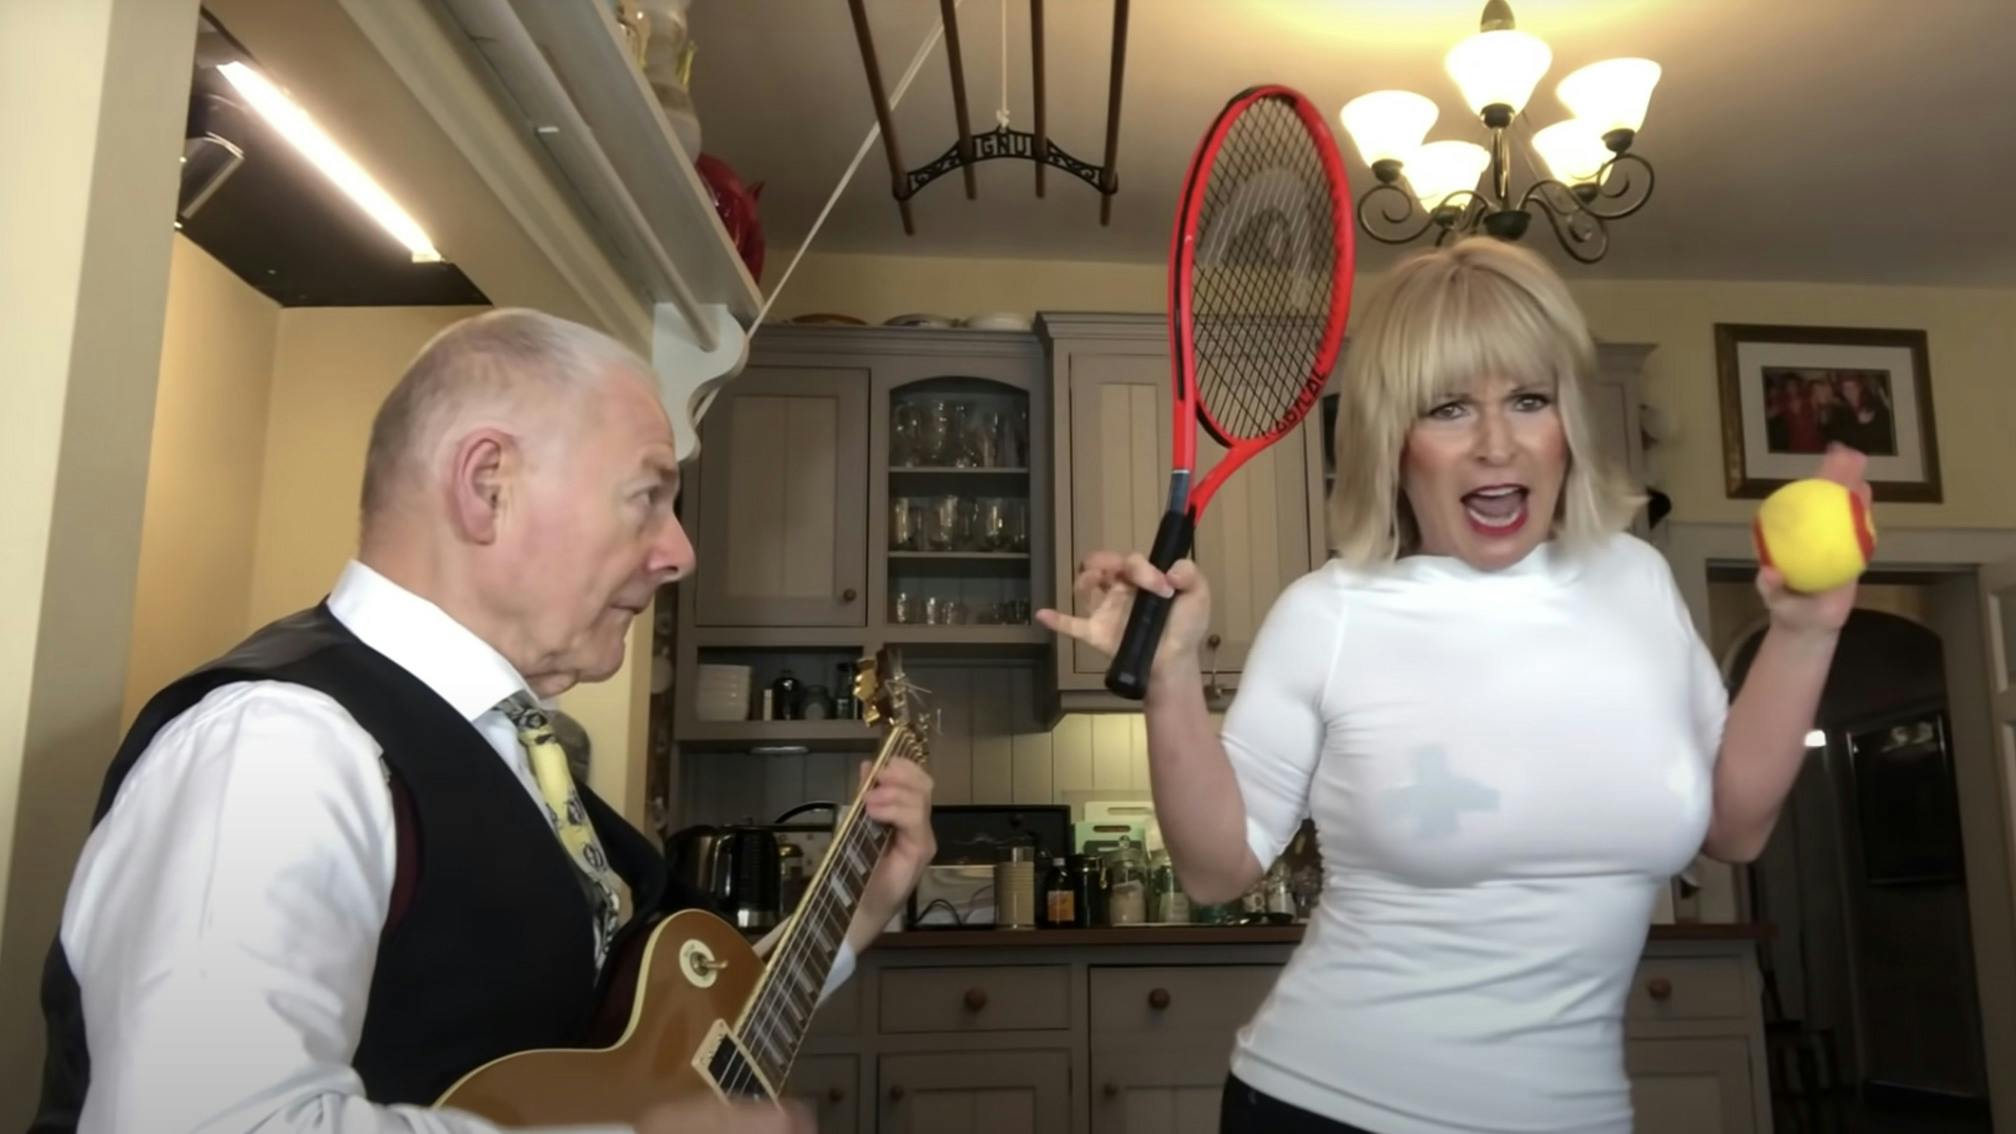 Robert Fripp and Toyah Willcox 'serve' up energetic cover of Mötley Crüe’s Girls, Girls, Girls